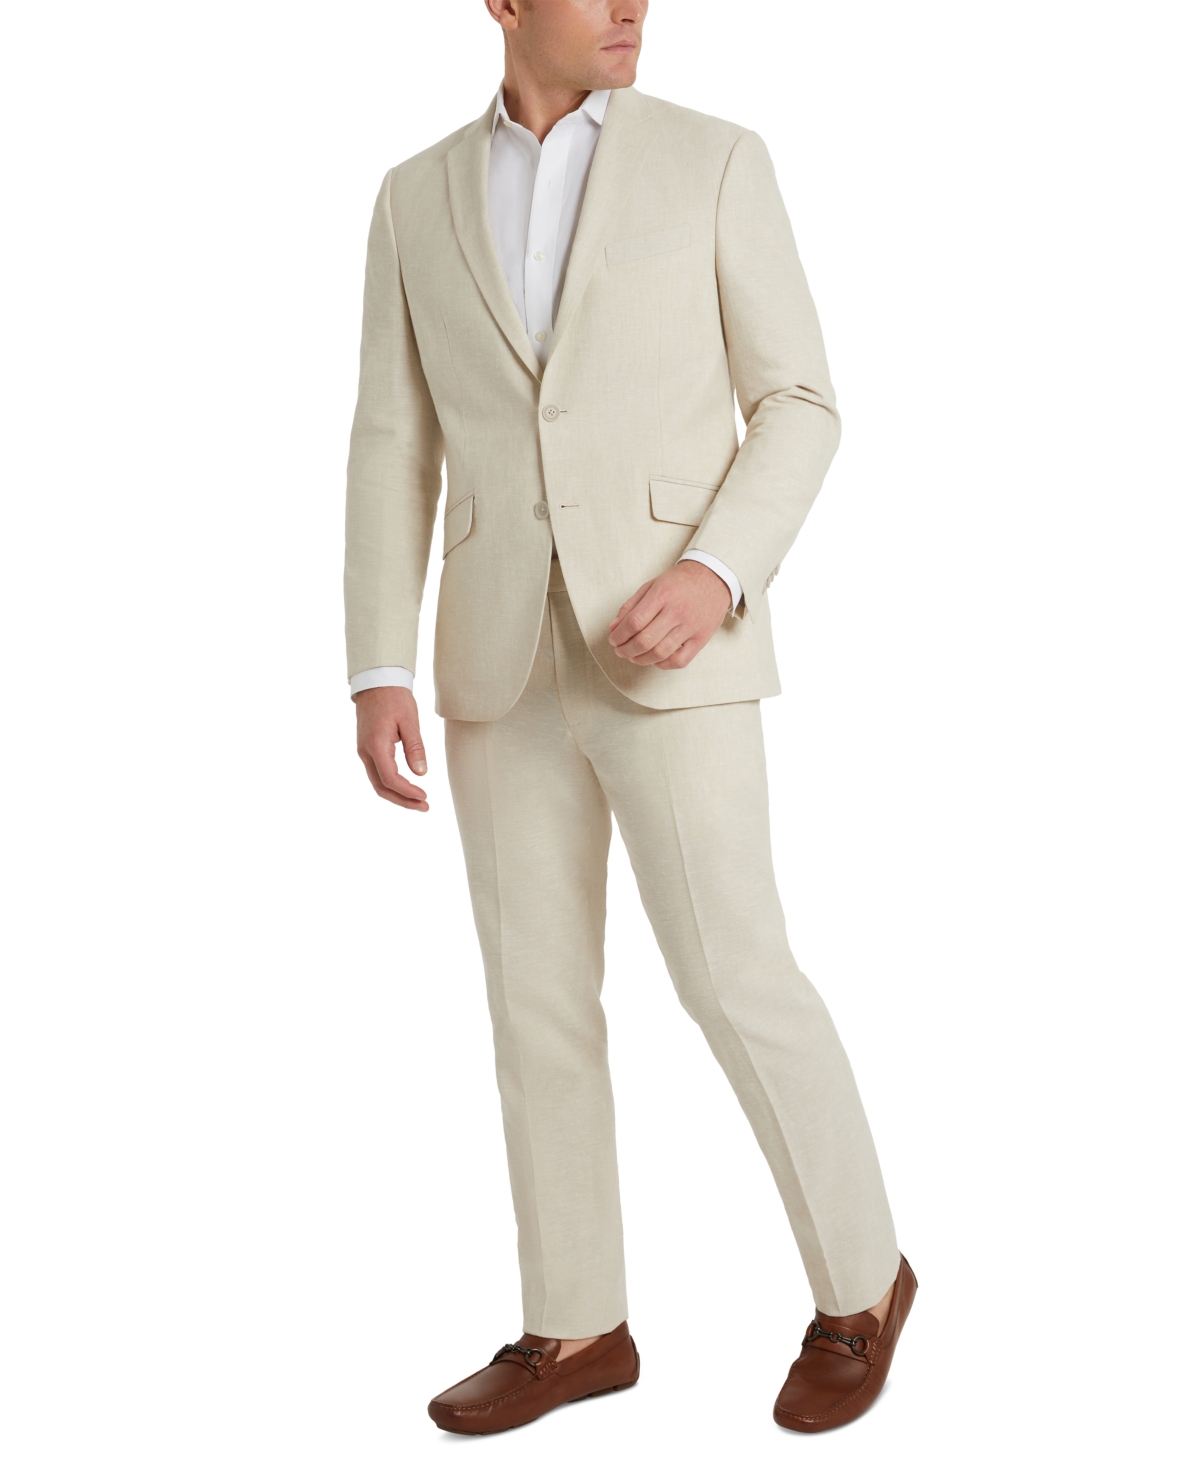 Kenneth Cole Reaction Men's Slim-fit Stretch Linen Solid Suit In Tan